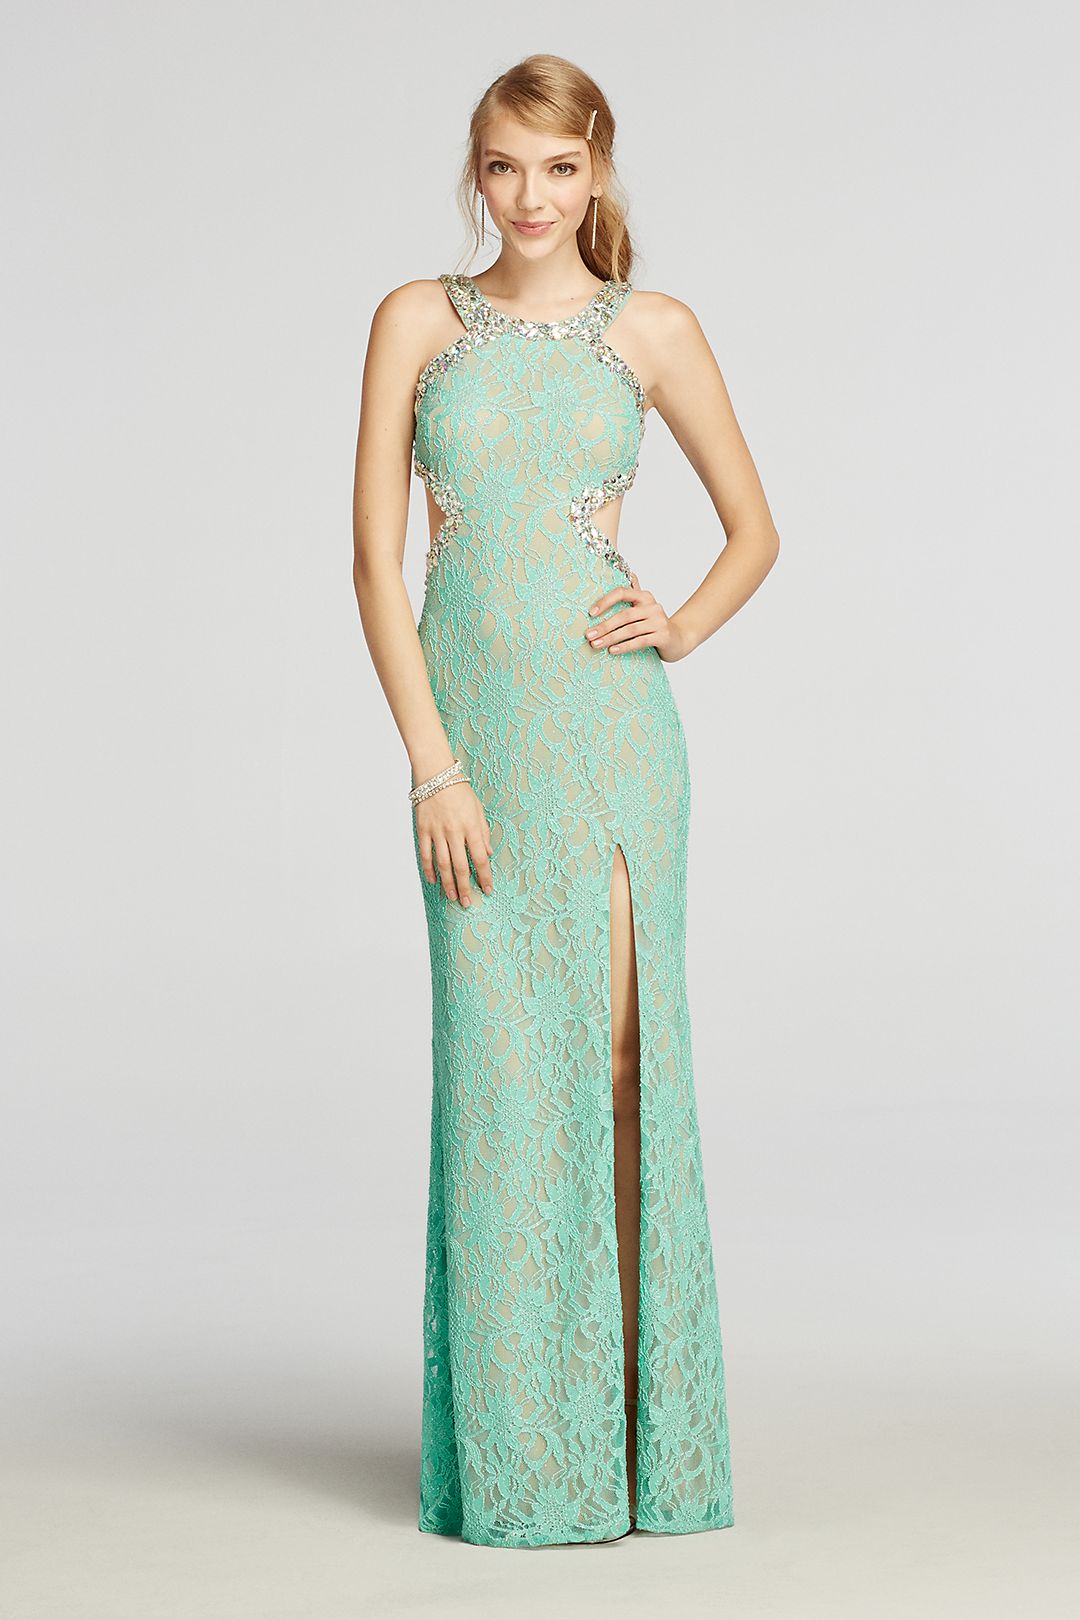 Halter Lace Prom Dress with Beaded Cut Outs | David's Bridal